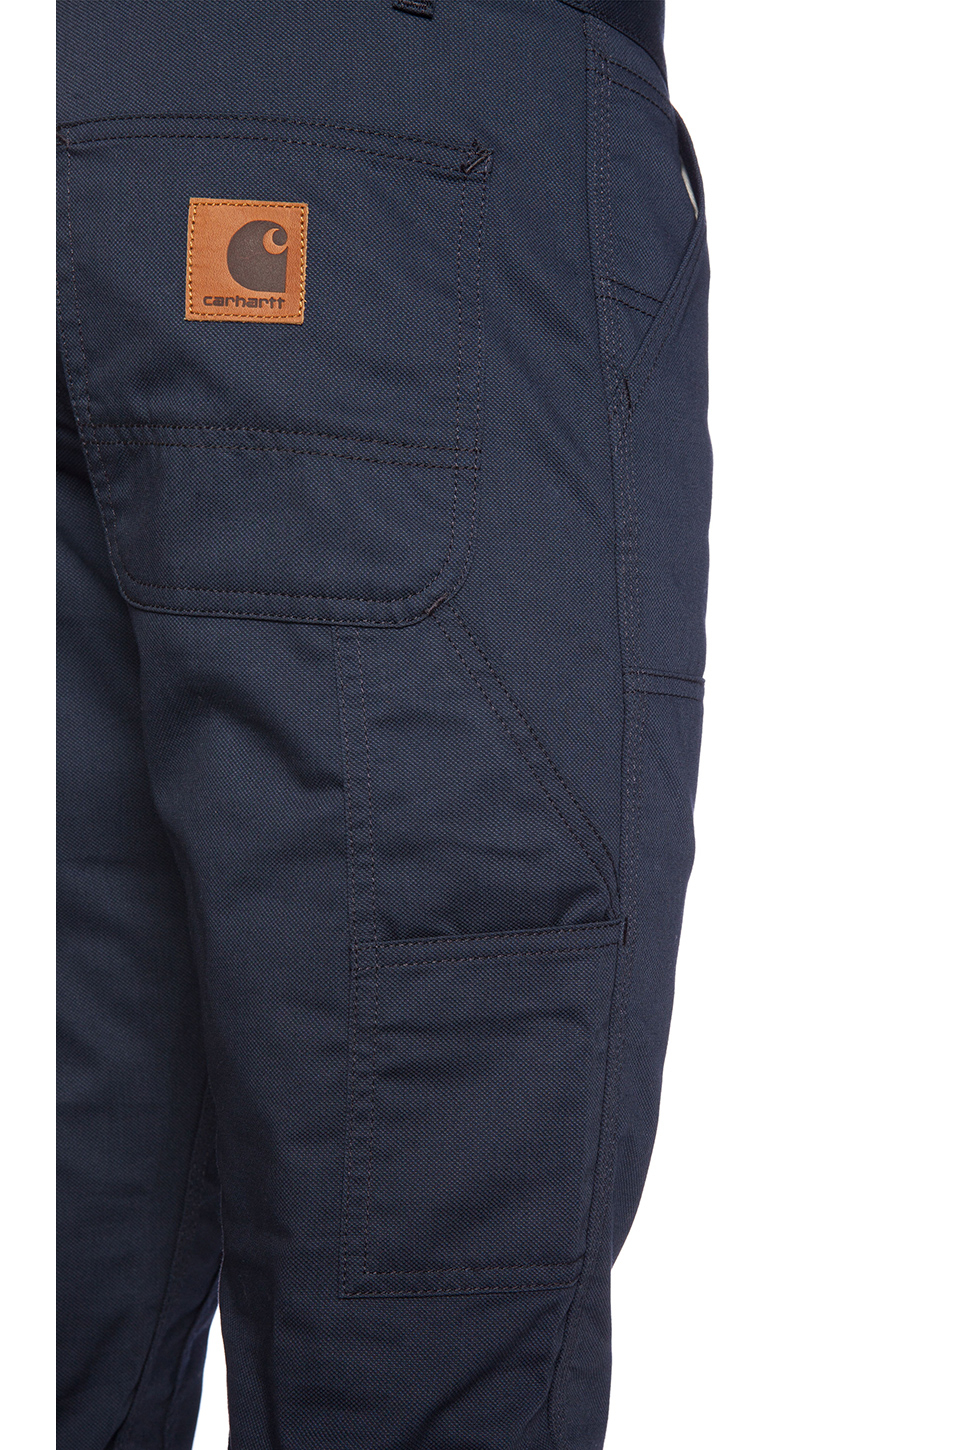 Carhartt WIP Lincoln Double Knee Pant in Blue for Men - Lyst